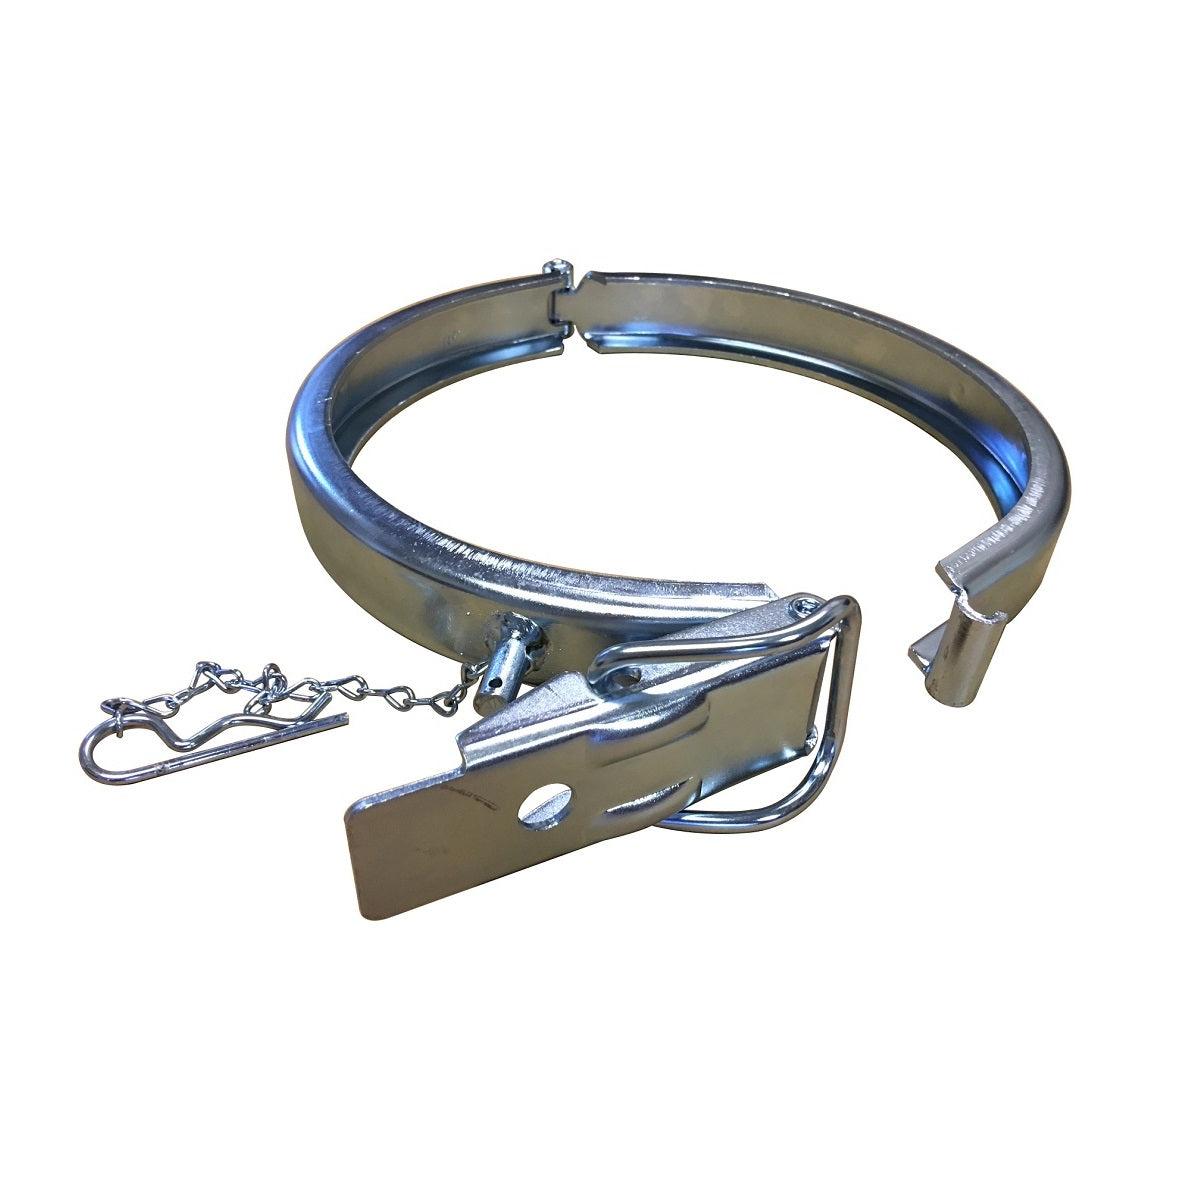 Lock Clamp for sewer suction tubes